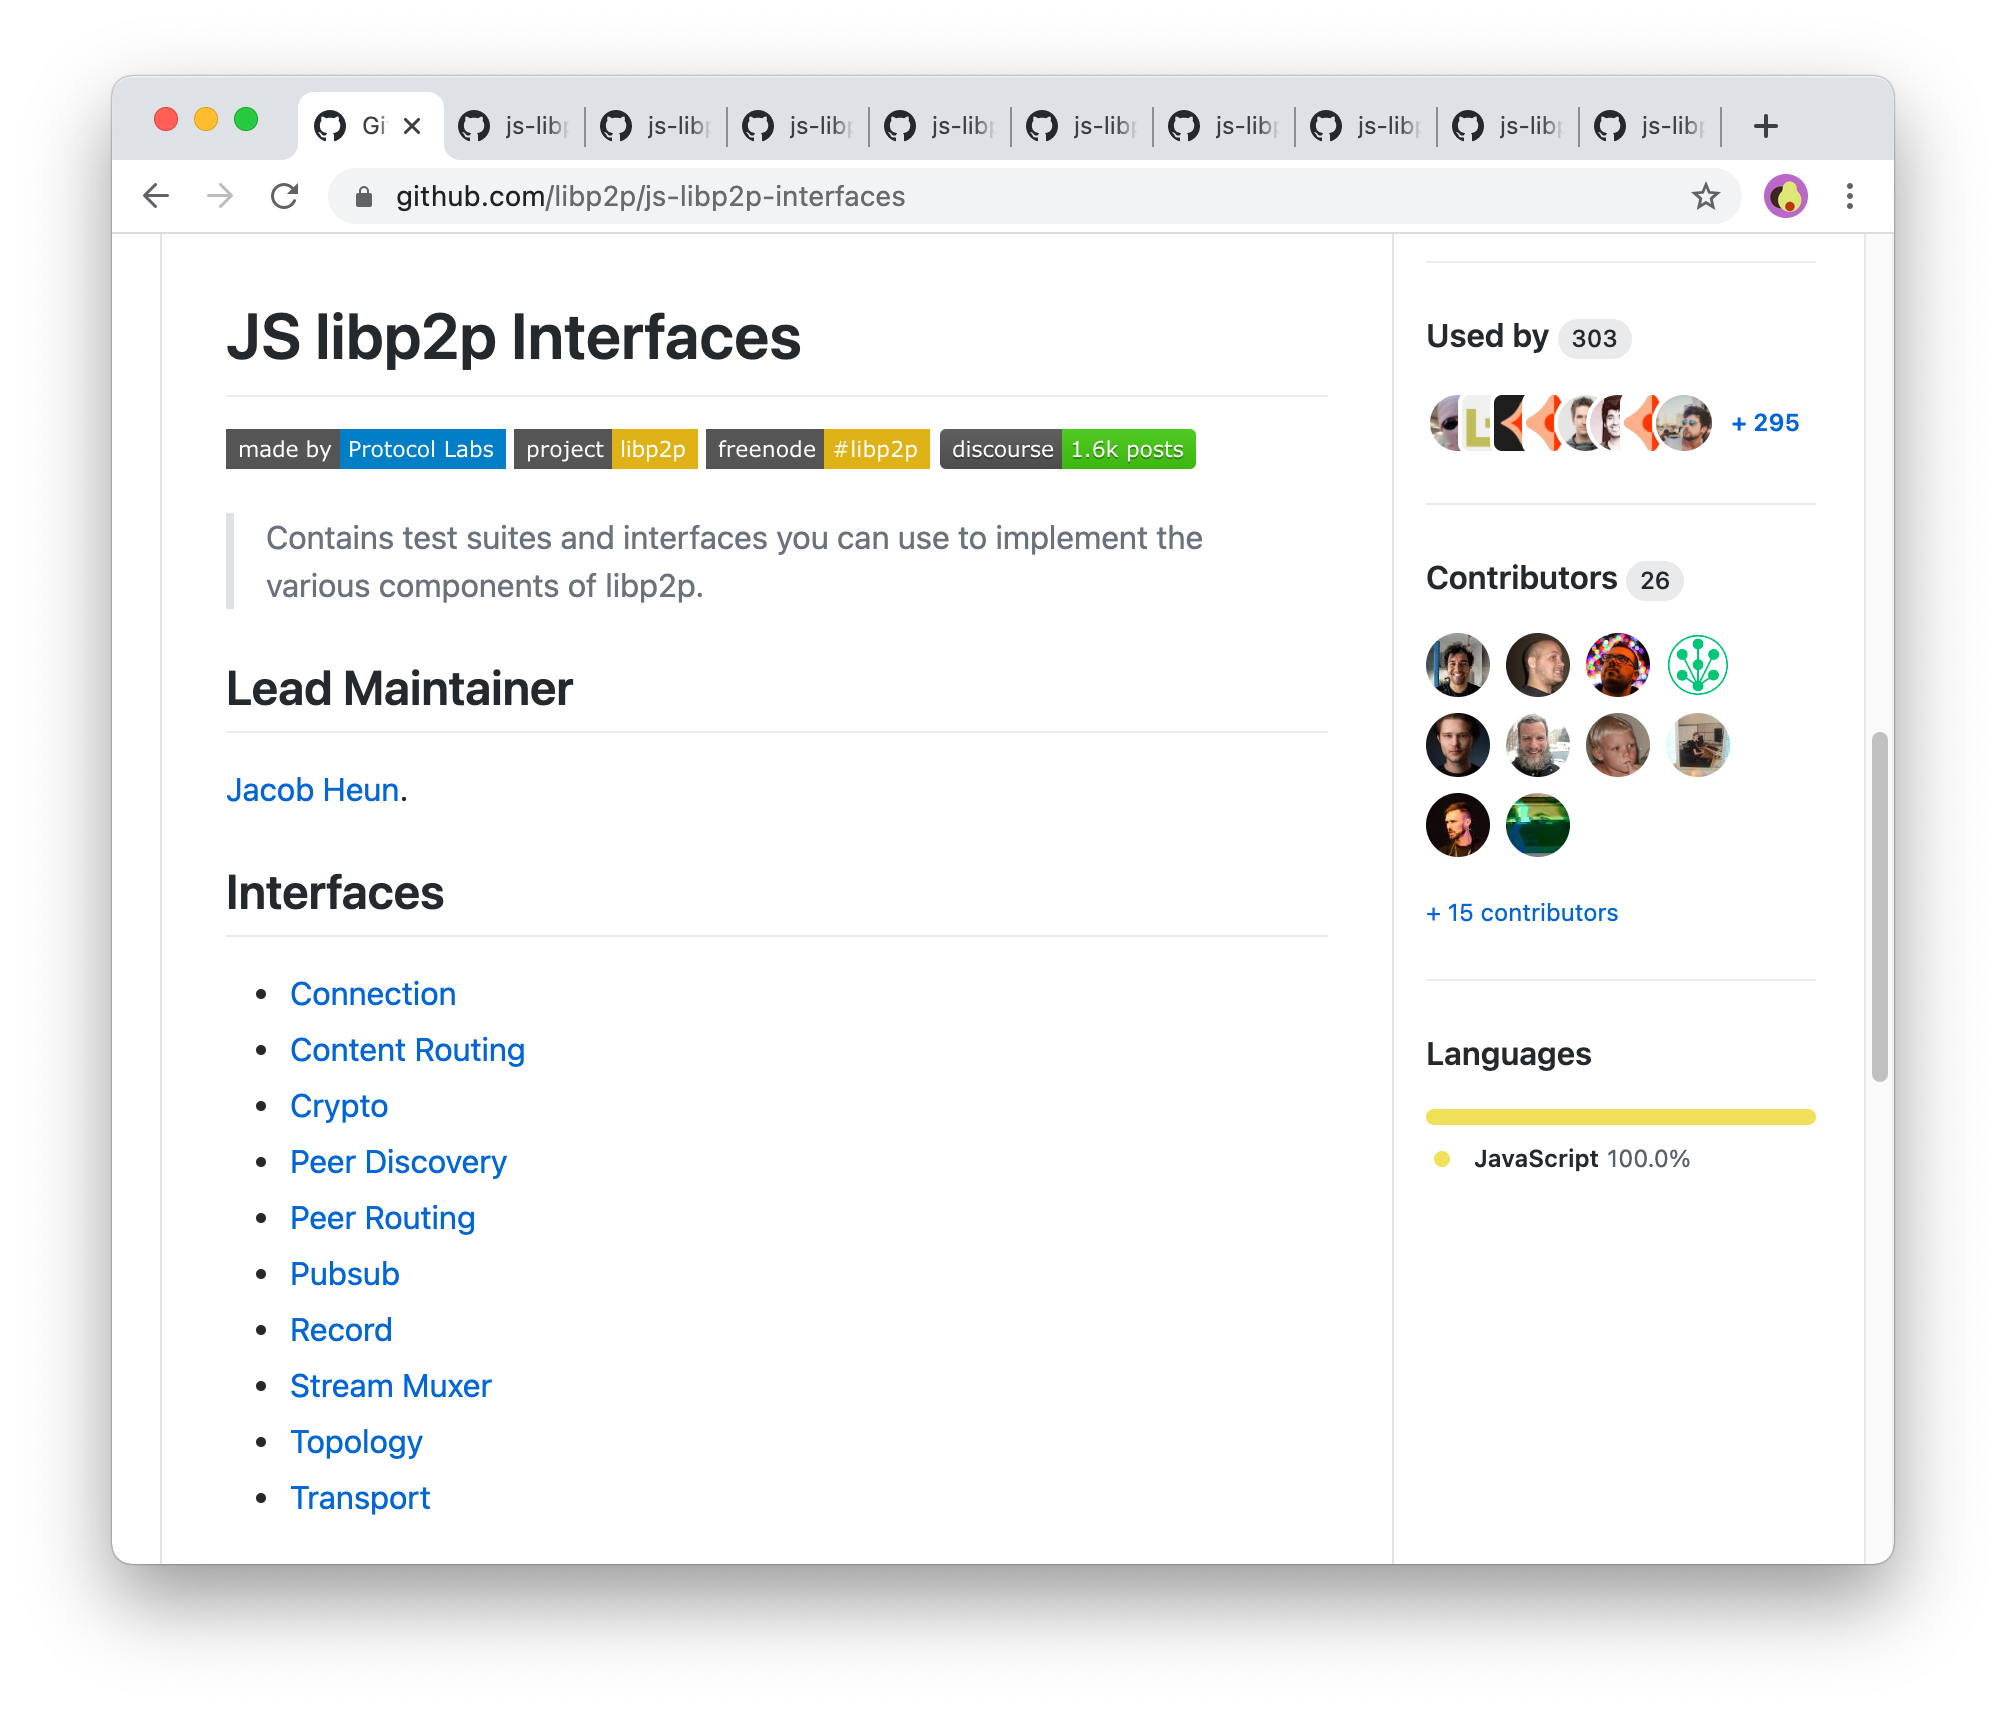 Screenshot showing the many interfaces listed at github.com/libp2p/js-libp2p interfaces